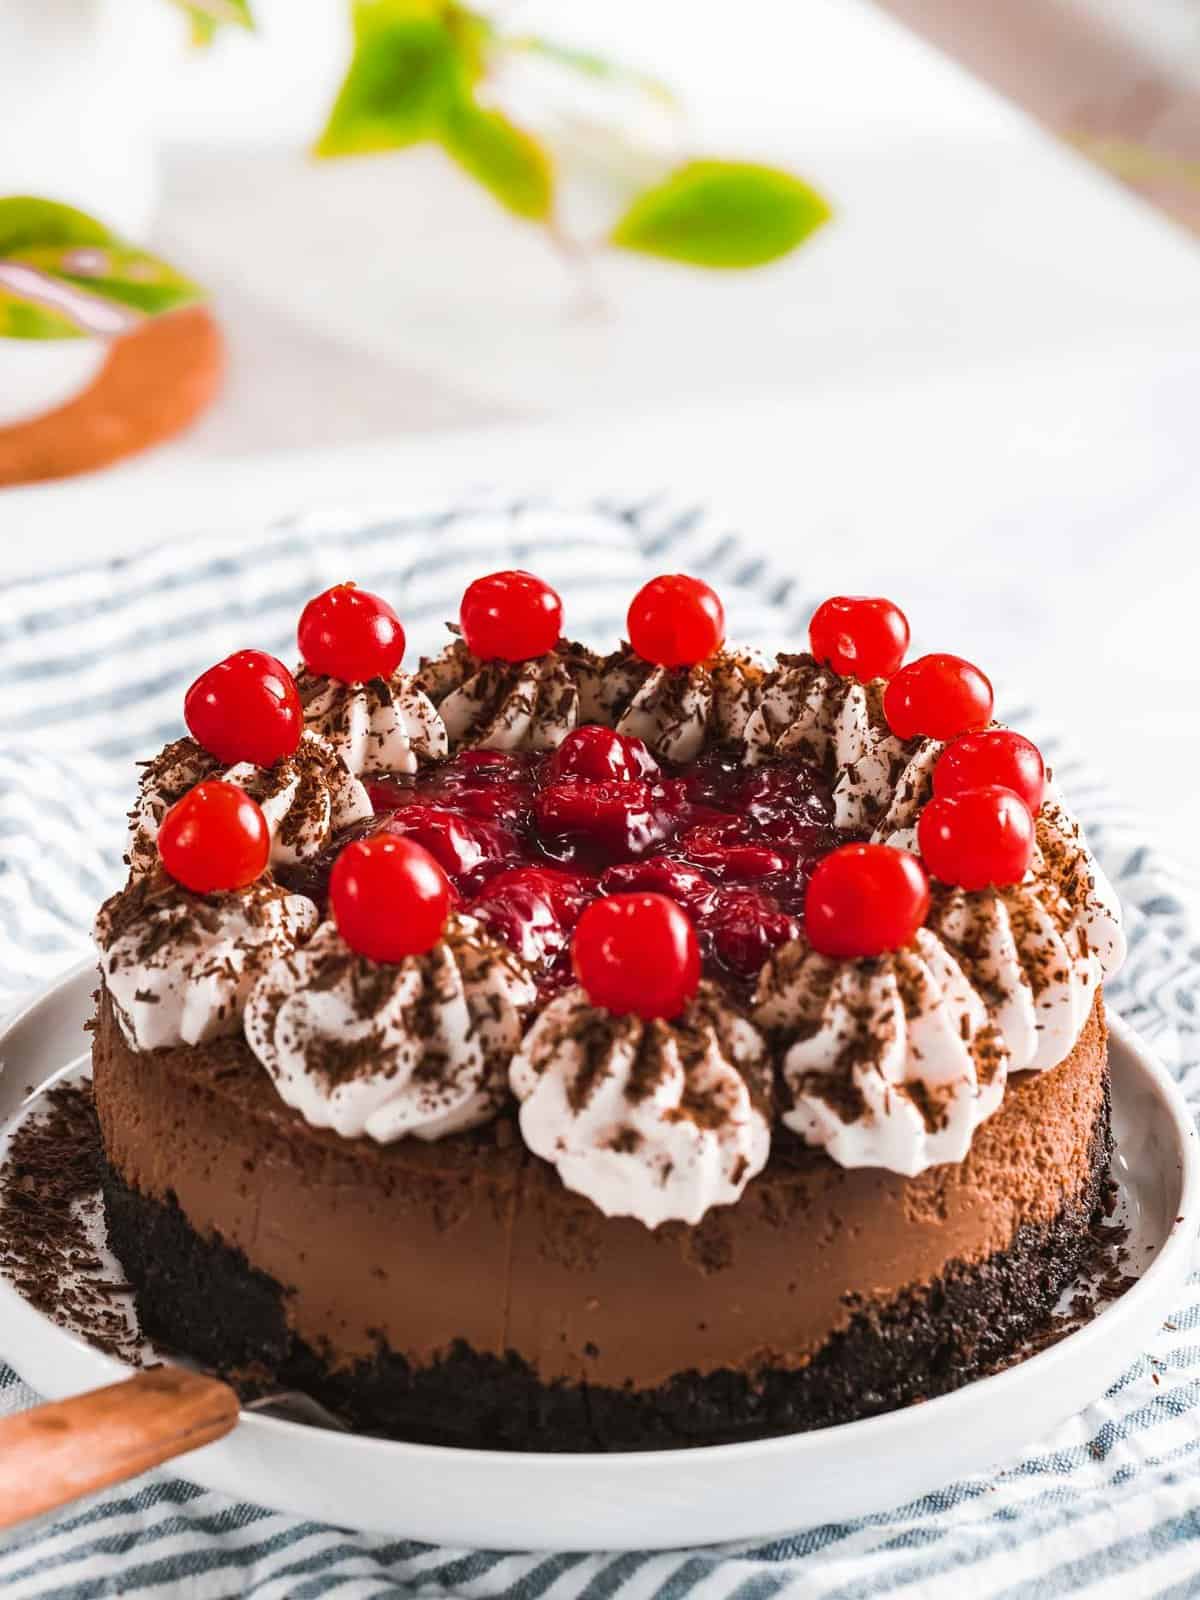 Black forest cheesecake with cherries, cherry topping, whipped cream, and chocolate crust.